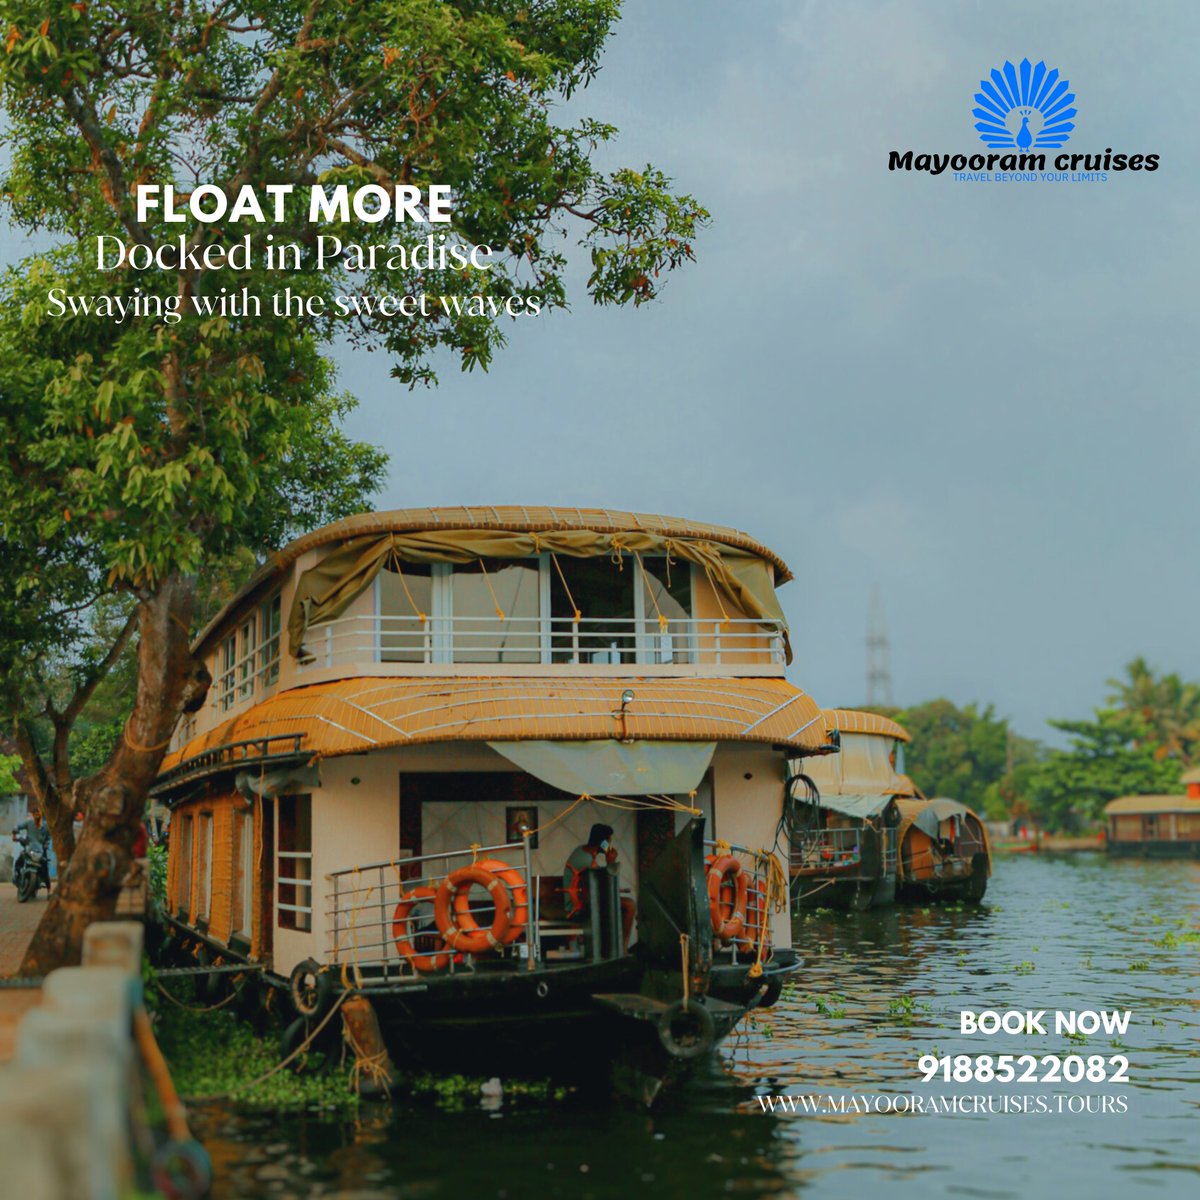 Alleppey Boat tours 🪁
BOOKINGS: 9188522082
mayooramcruises.tours
#boat #boating #boatlife #boat #boattrips #boatlifestyle #boatparty #houseboat #houseboating #houseboatlife #houseboats #houseboats #Alleppey #alleppey #alleppeytourism #alleppeyhouseboat #alleppeybackwaters